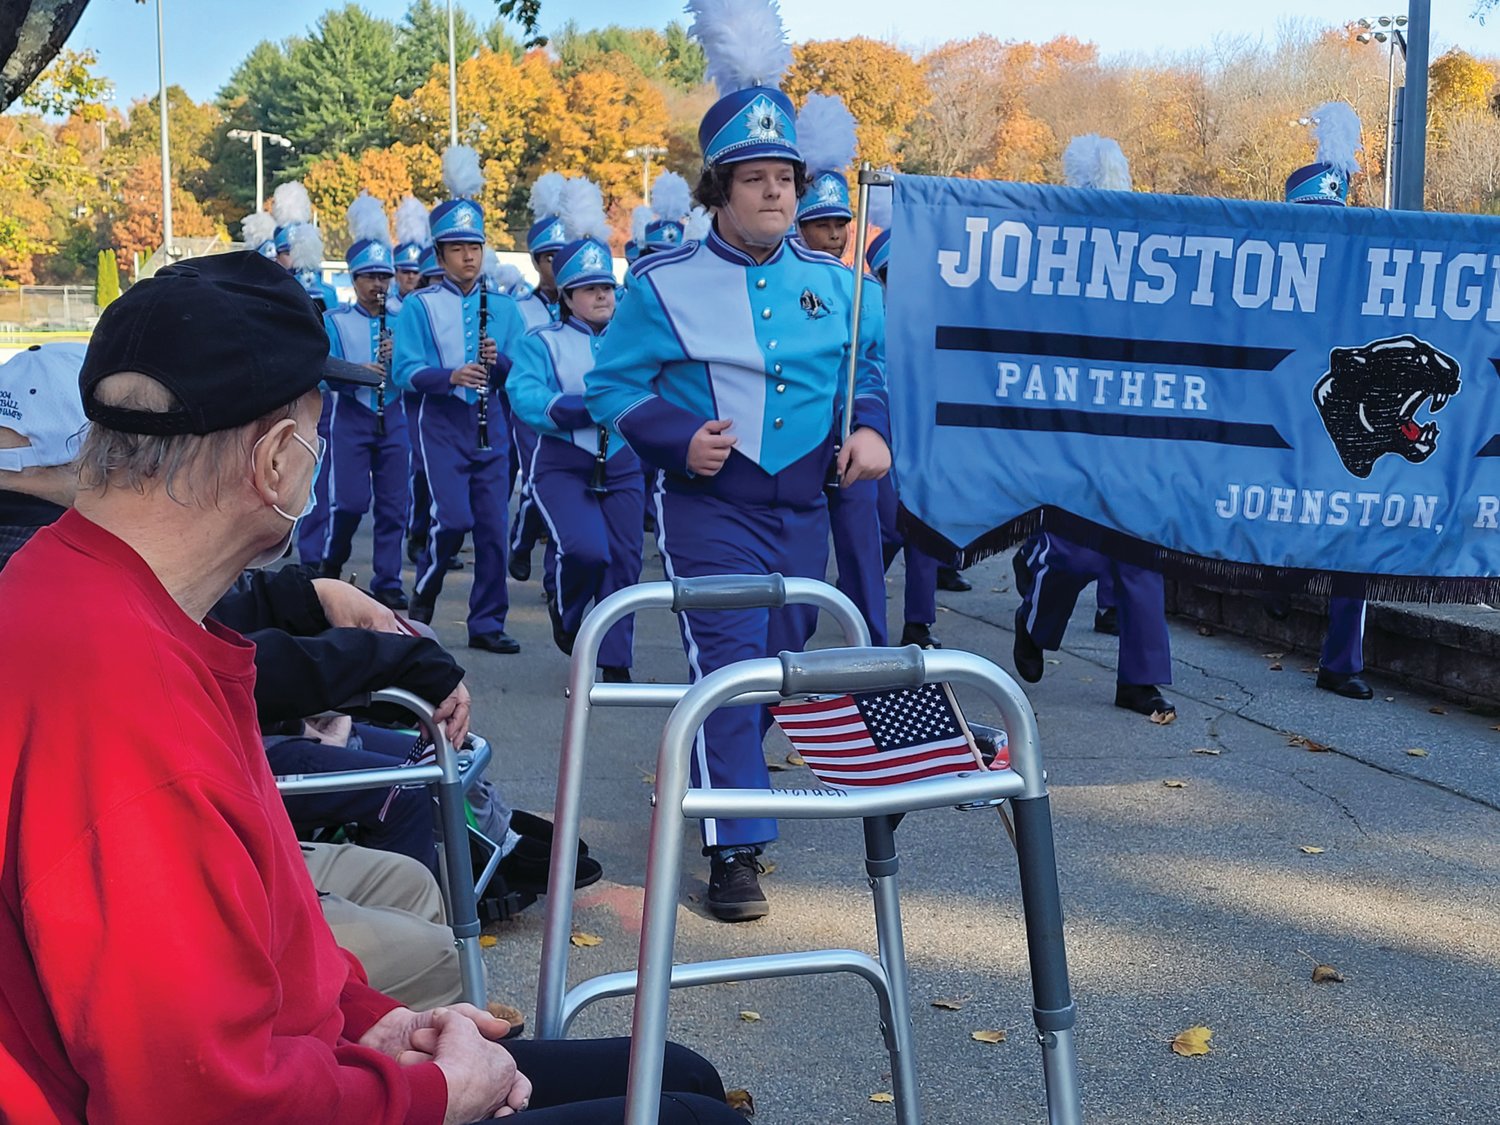 SKY SOLDIER: Veteran George M. was driven to Johnston Memorial Park on Wednesday for a Veterans Day Recognition Ceremony. He had a prime seat for the Johnston High School Marching Band performance.